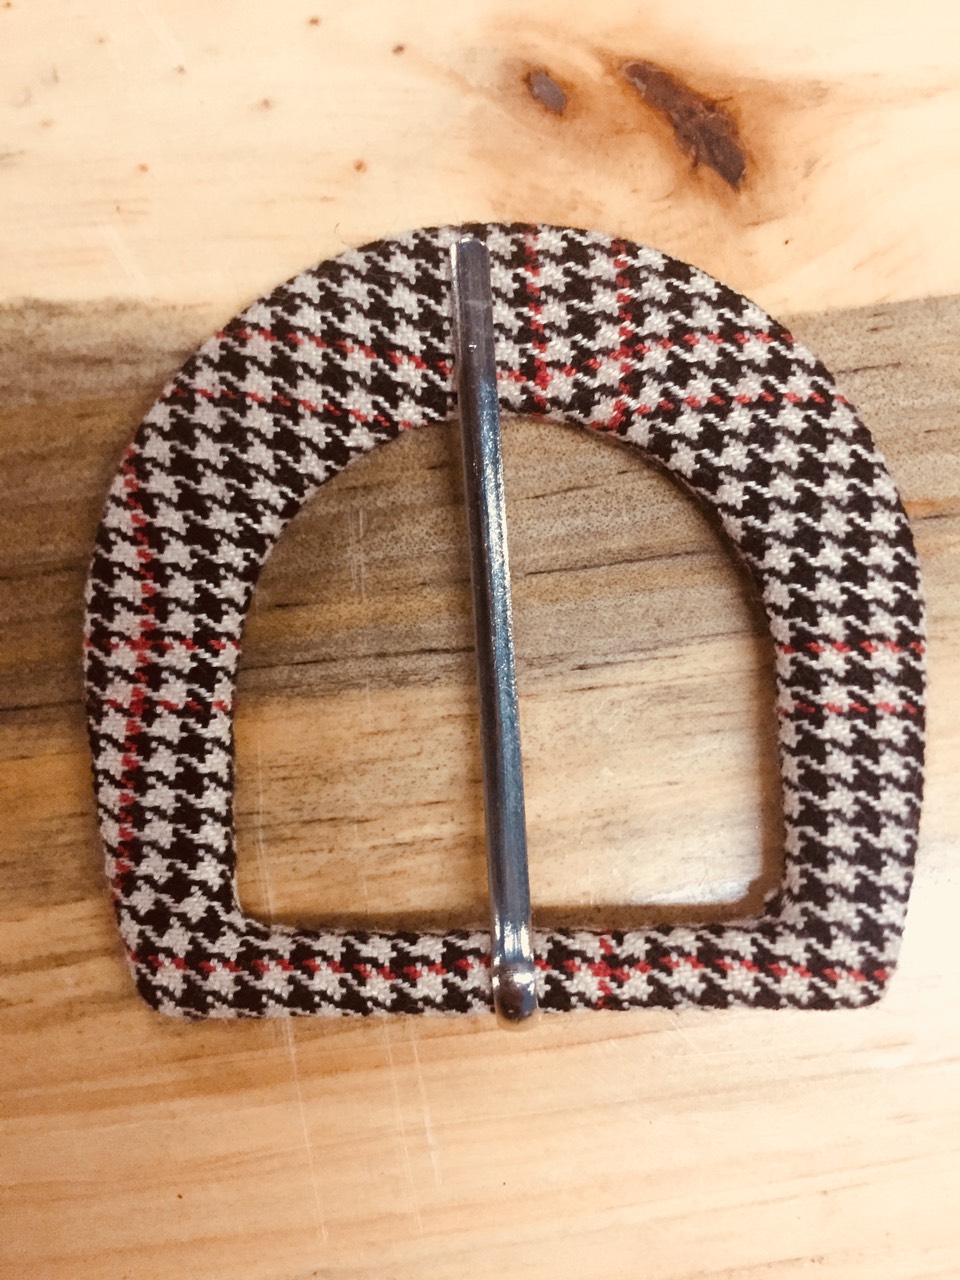 Fabric covered belt buckle